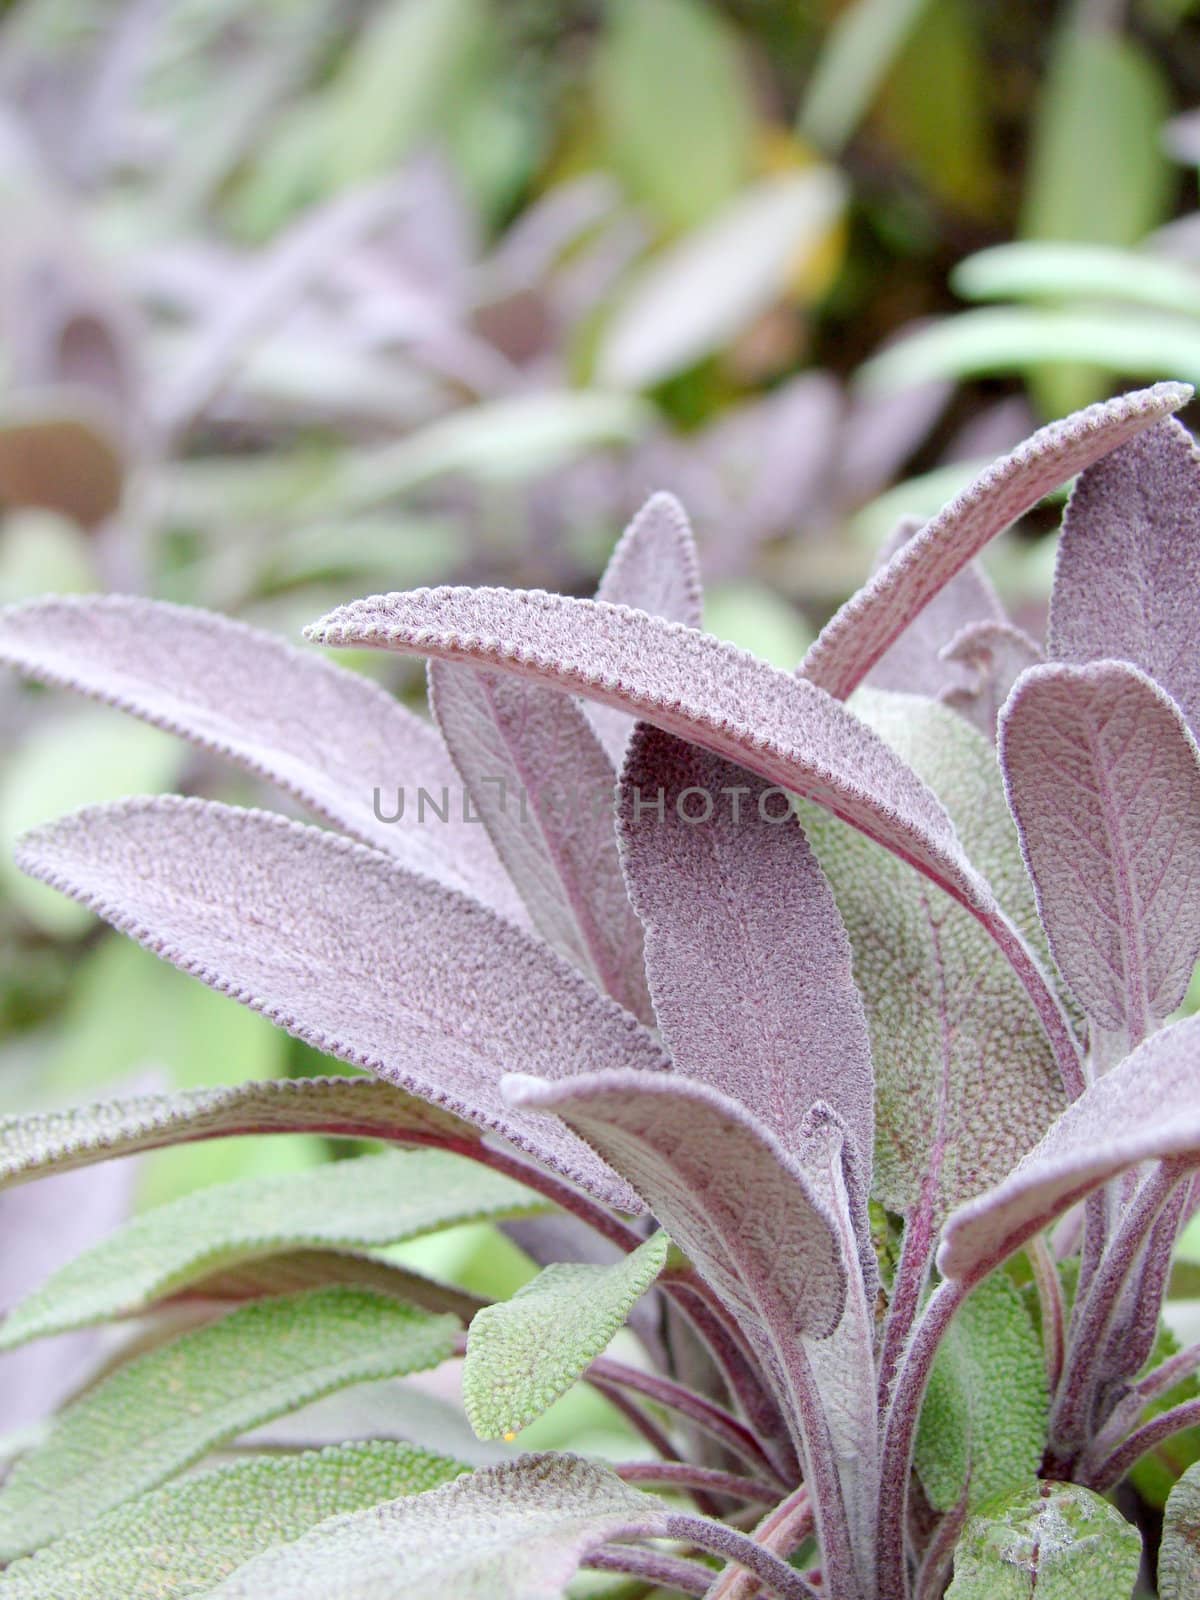 purple and green leaves with a soft furry coat